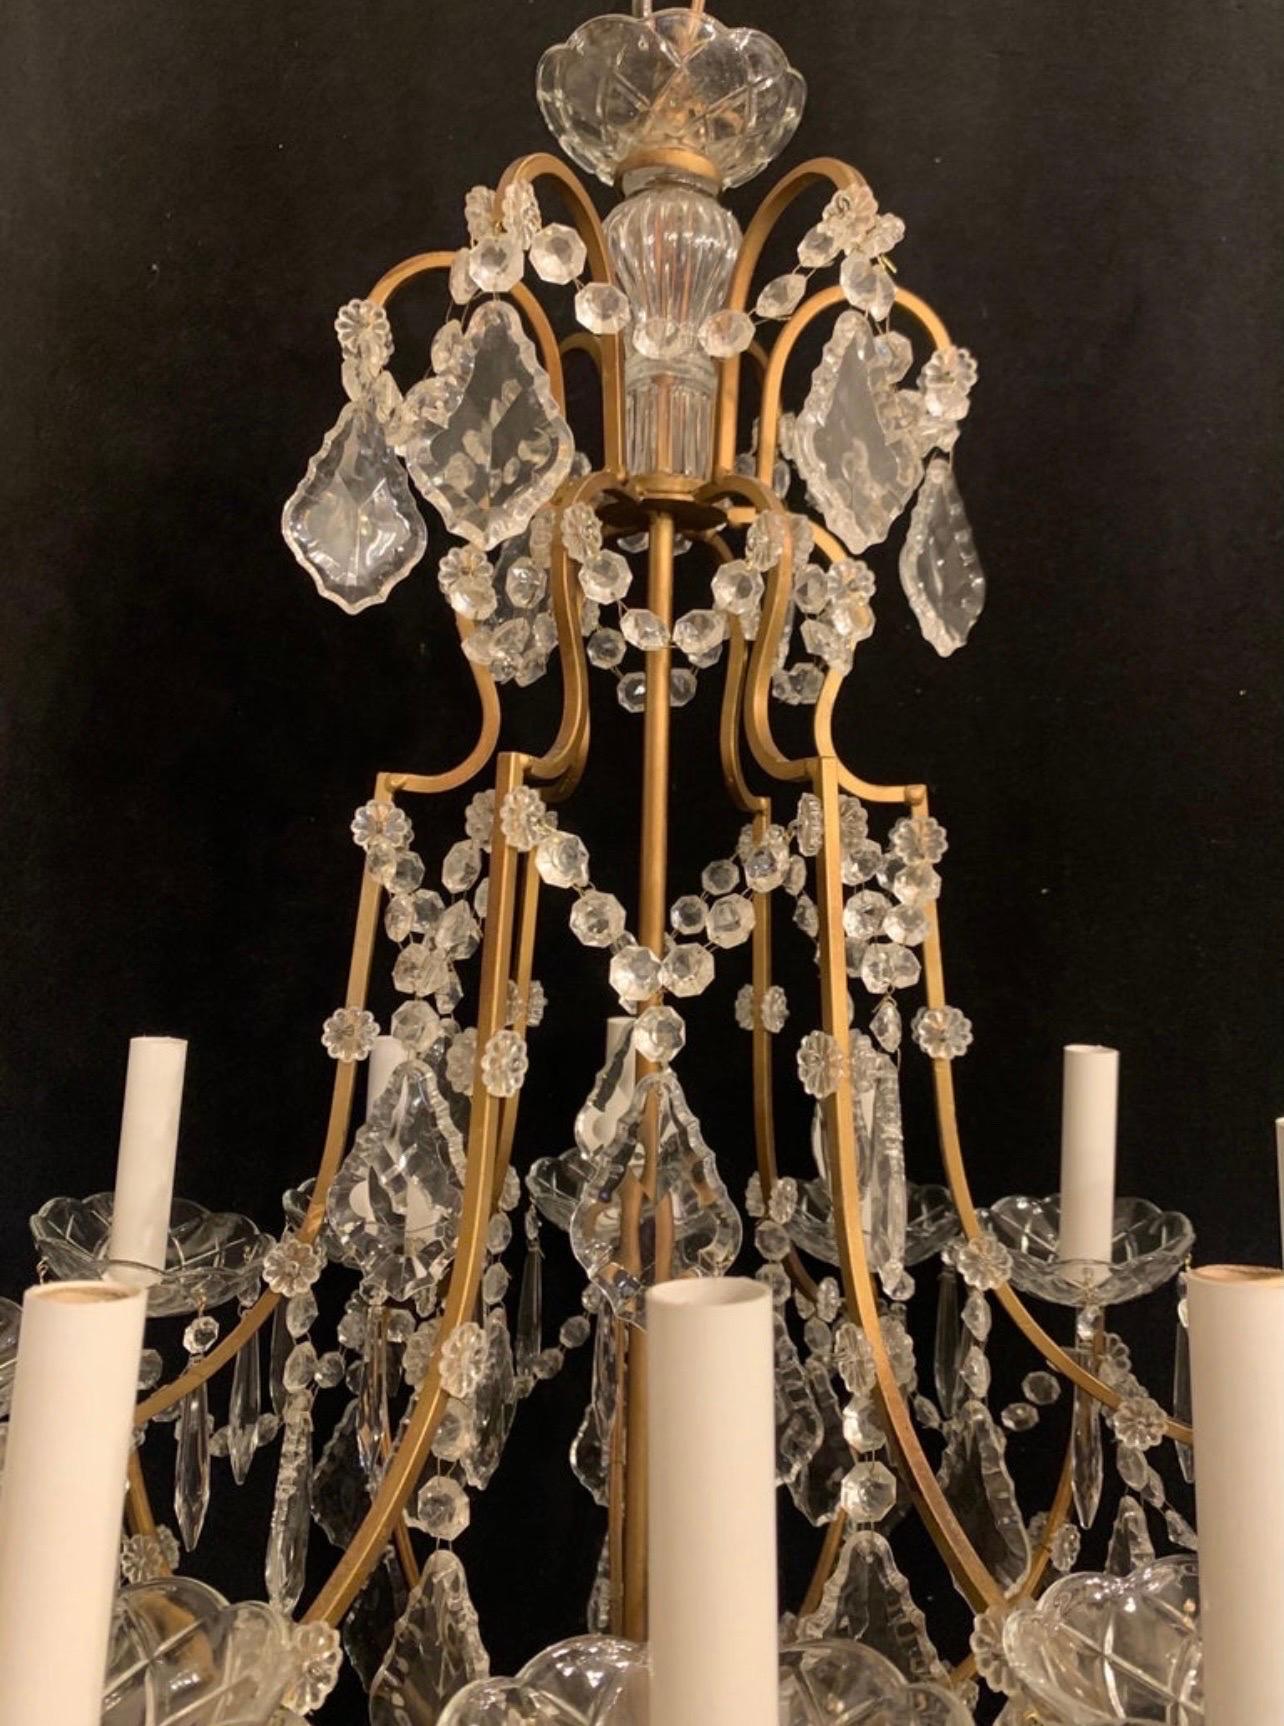 A wonderful Italian crystal and gold gilt 12 candelabras light fixture chandelier, rewired and ready to enjoy with chain canopy and mounting hardware included.